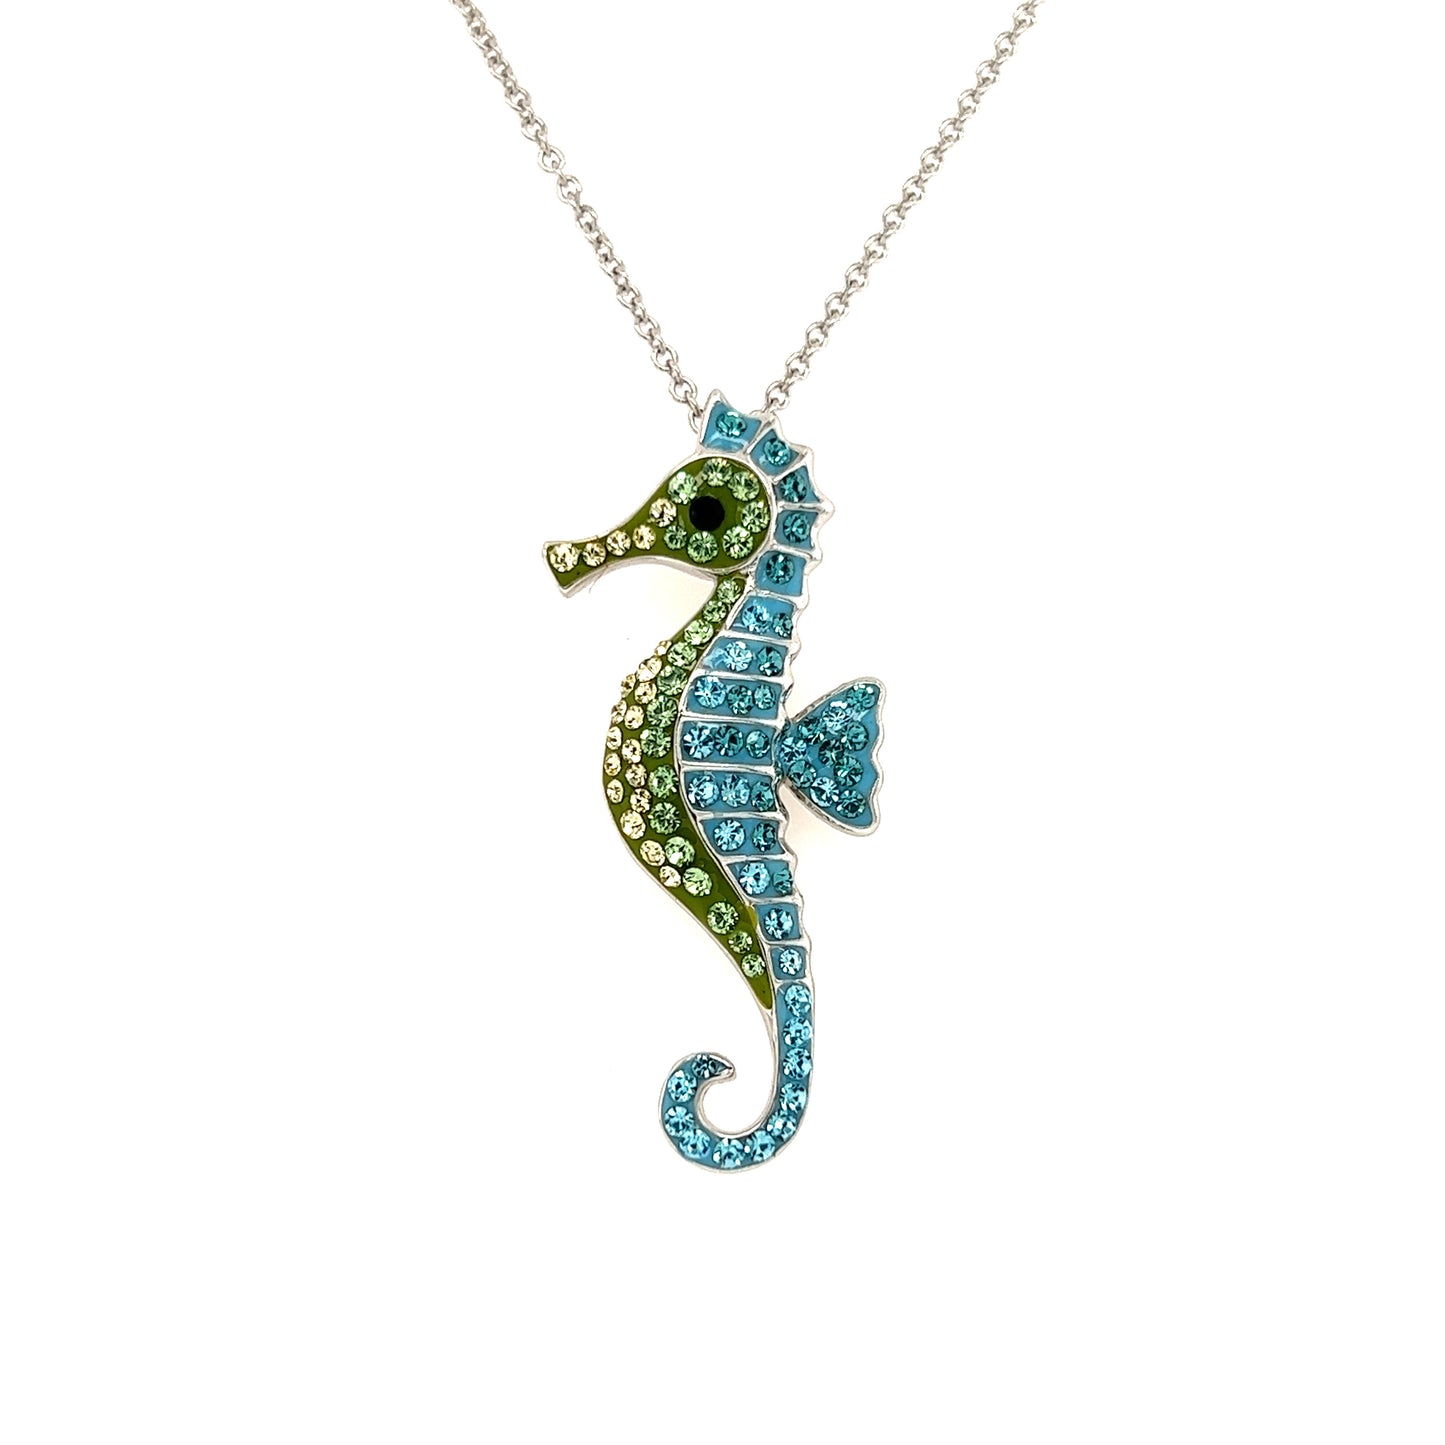 Seahorse Necklace with Multicolor Crystals in Sterling Silver Pendant View